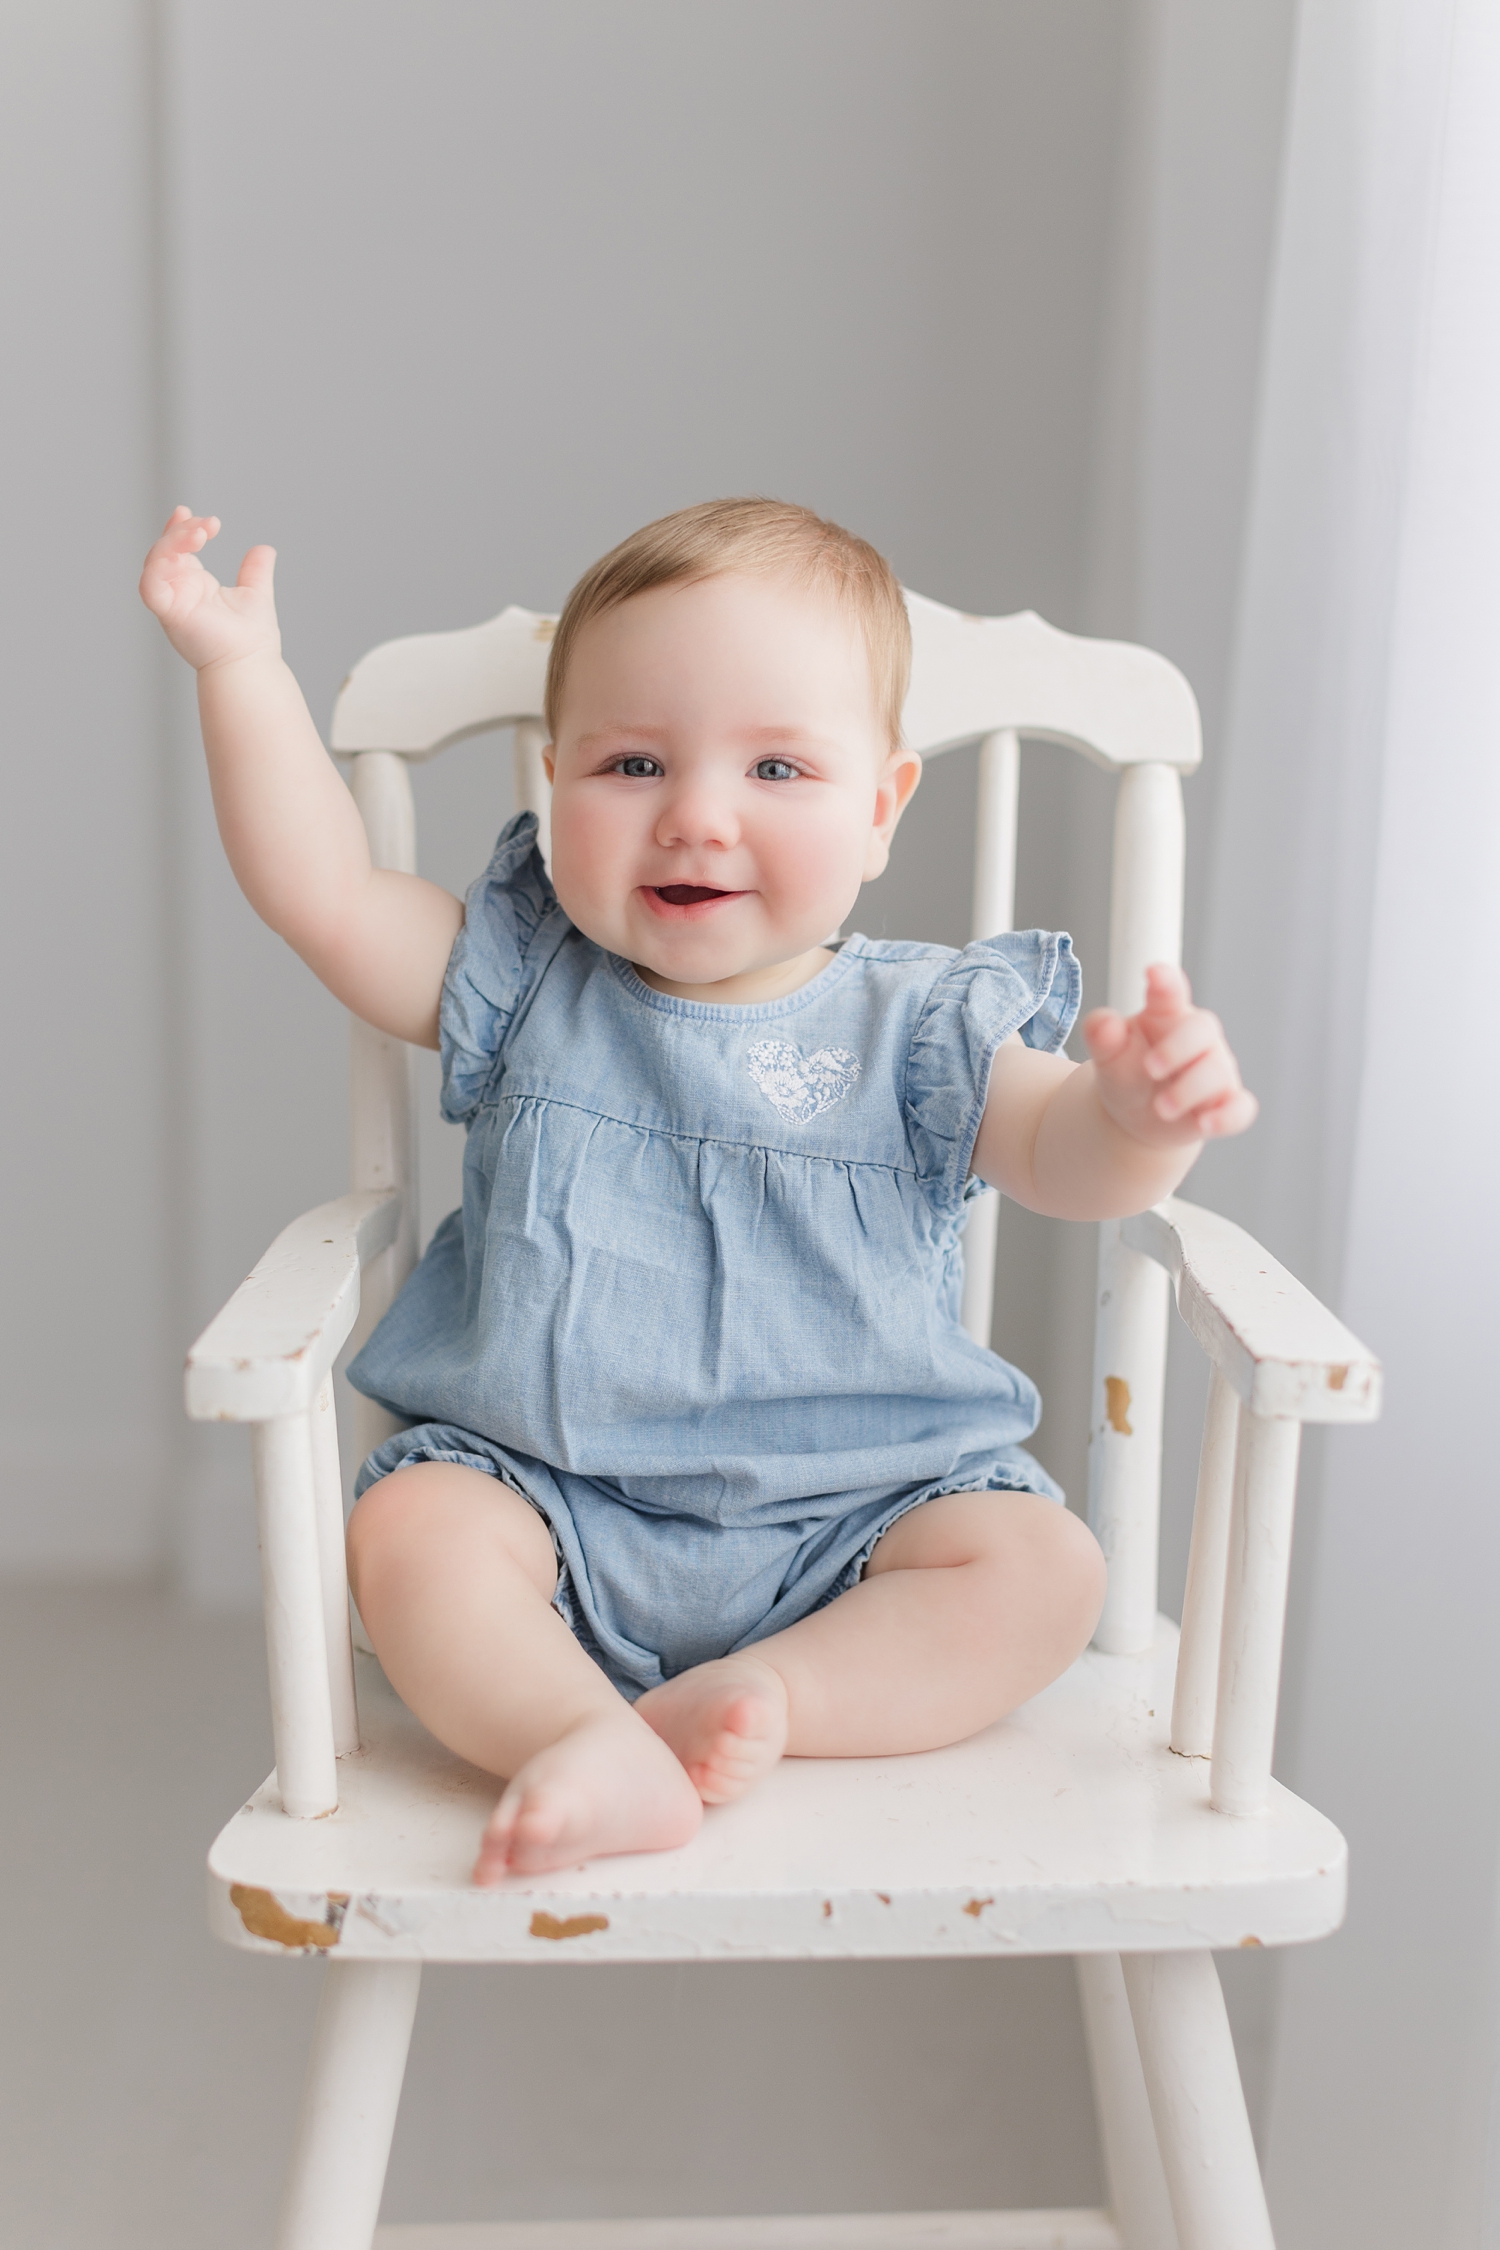 Baby Grace reaches her arms up and smiles as she sits on a vintage white high chair in an all white room. She is wearing a light blue chambray romper that matches perfectly with her blue eyes | CB Studio